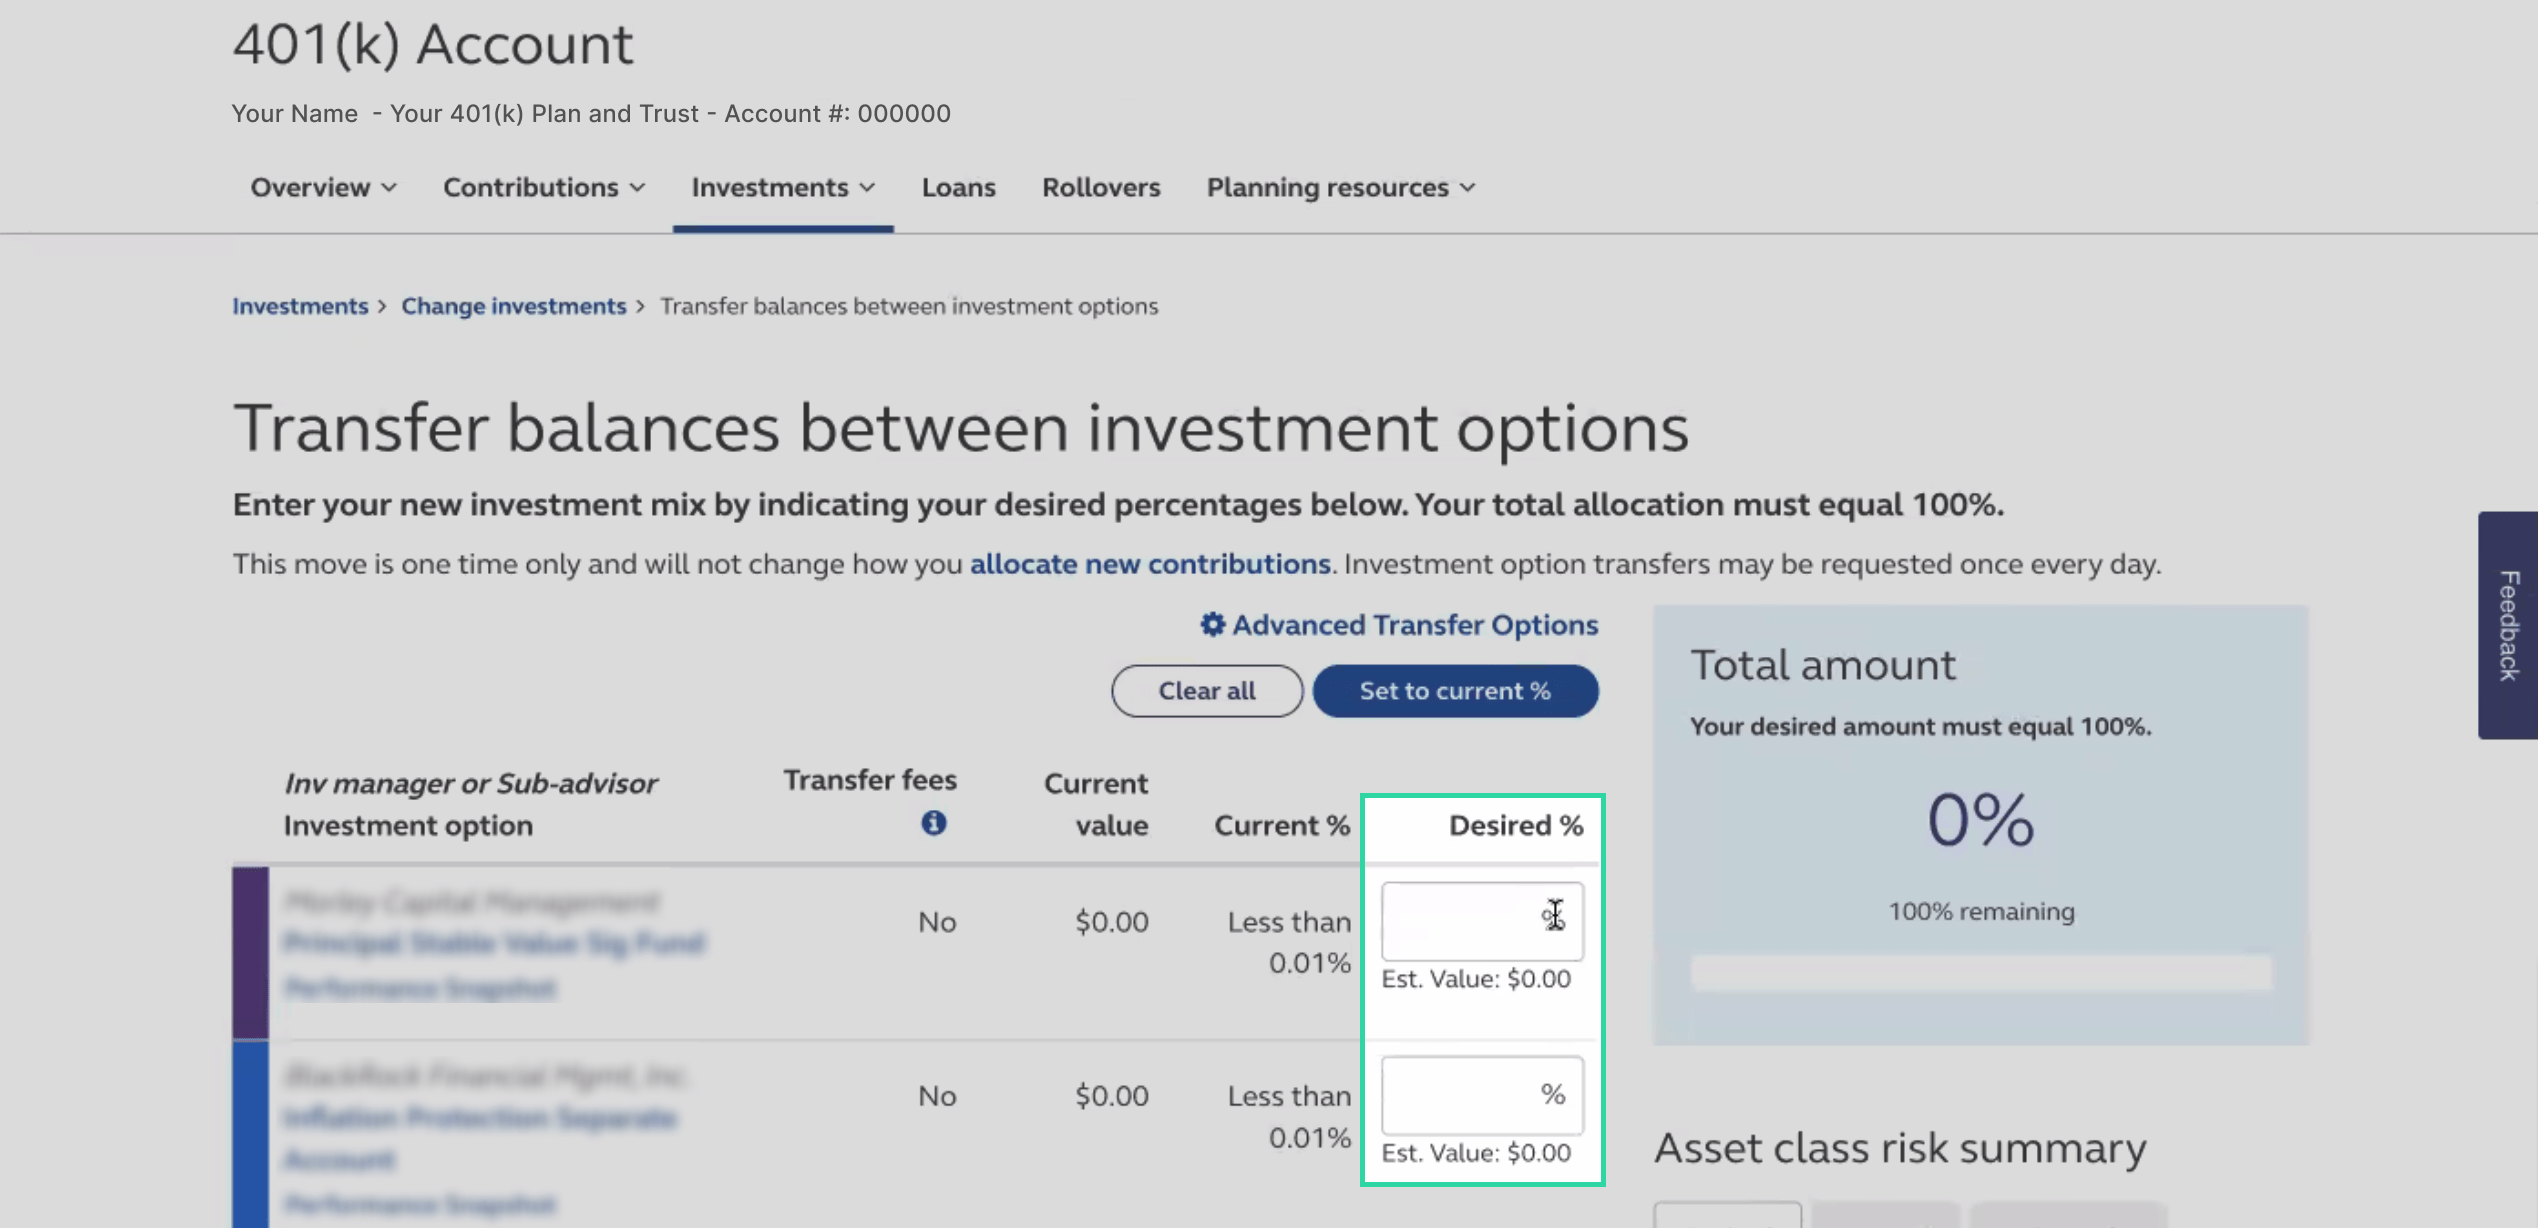 On the “Transfer balances between investment options” page, input the desired % allocation to each of the funds. Make sure that this matches Capitalize’s recommendation! Make sure to save your changes.